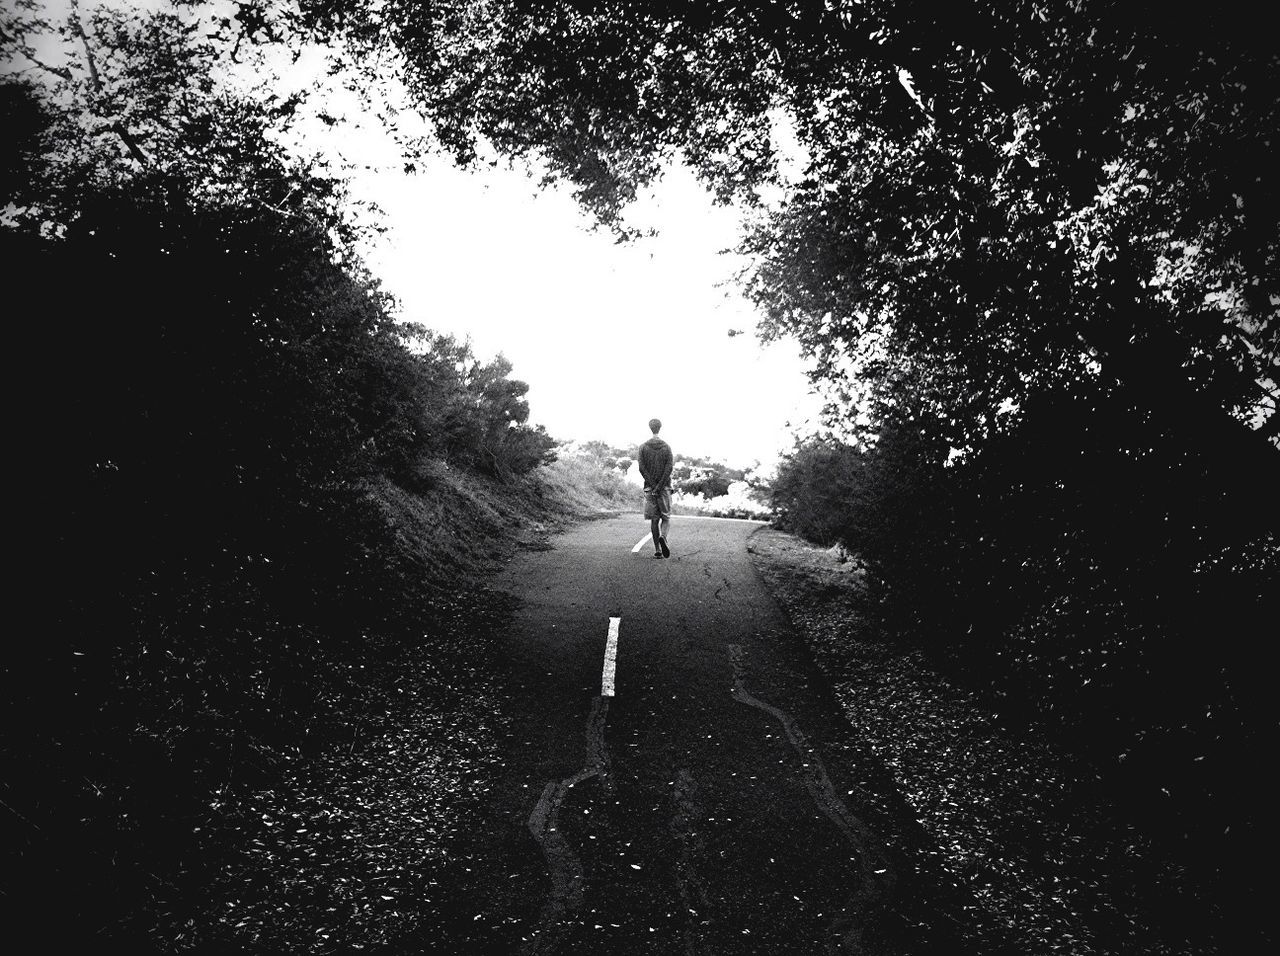 Rear view of man walking on country road against sky